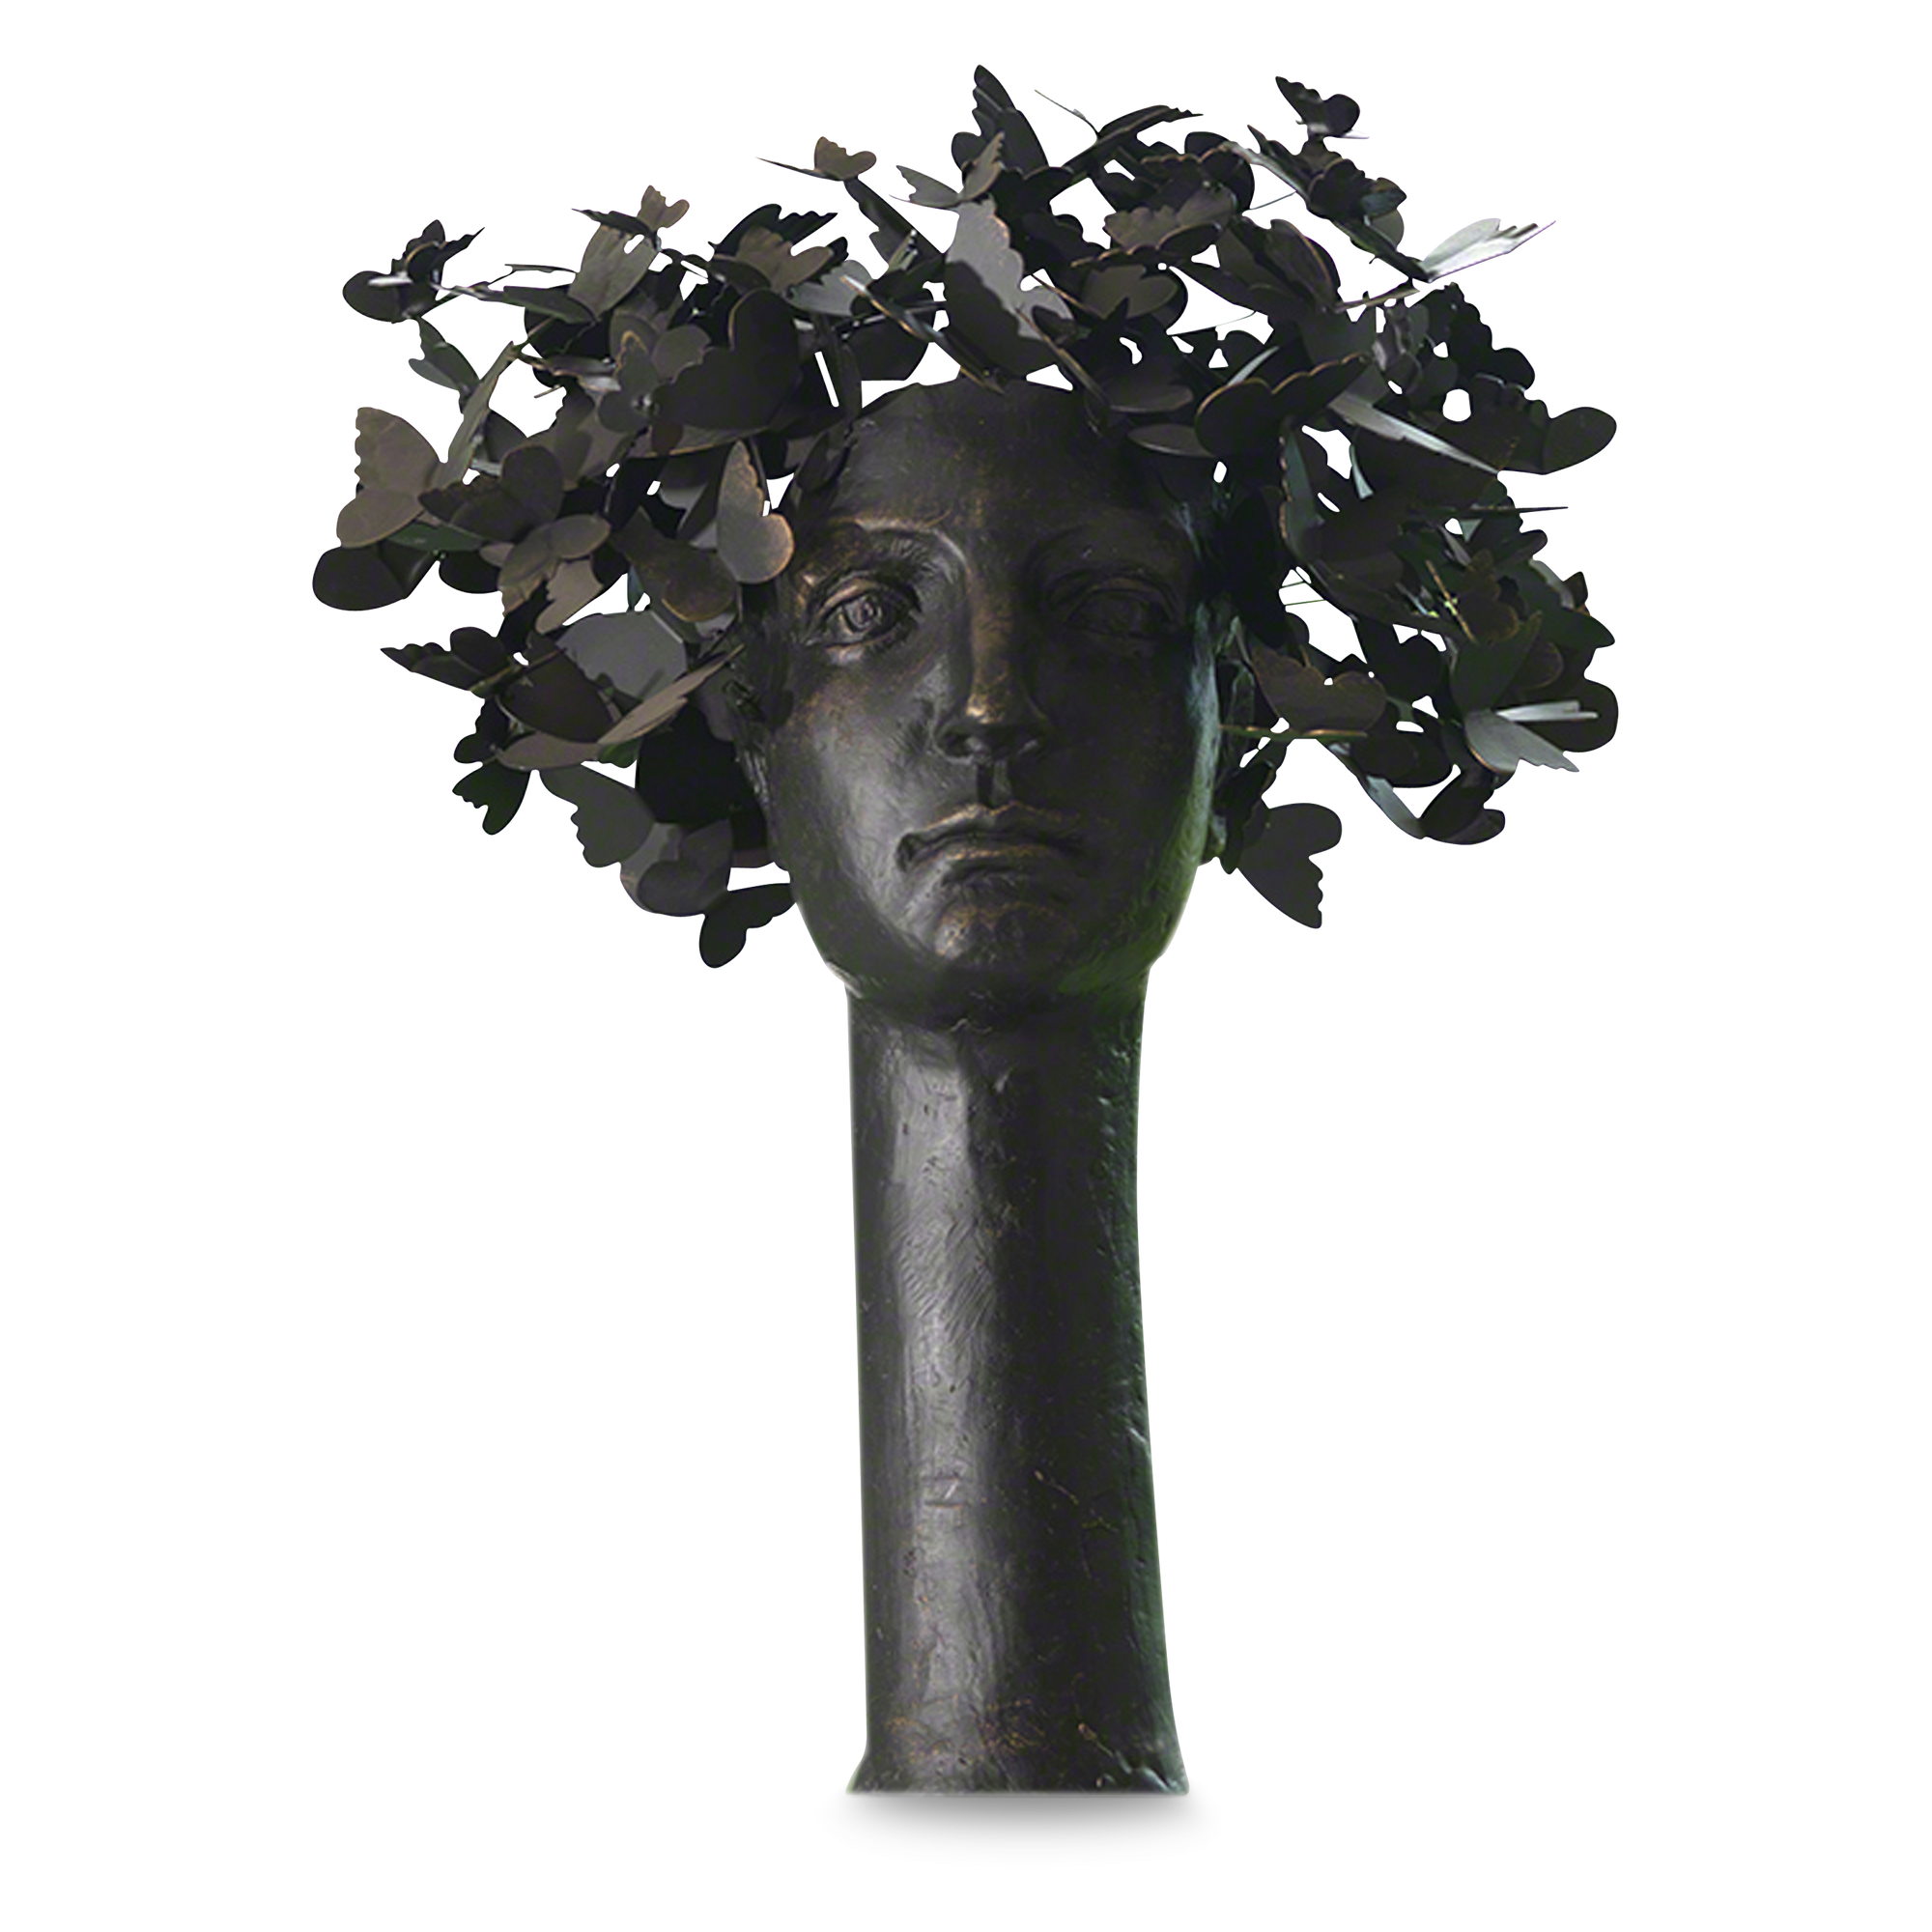 With a iconic and unique design, this scupture features hundreds of hand applied iron butterflies on a femine scupture portrait that sits atop an iron bust.